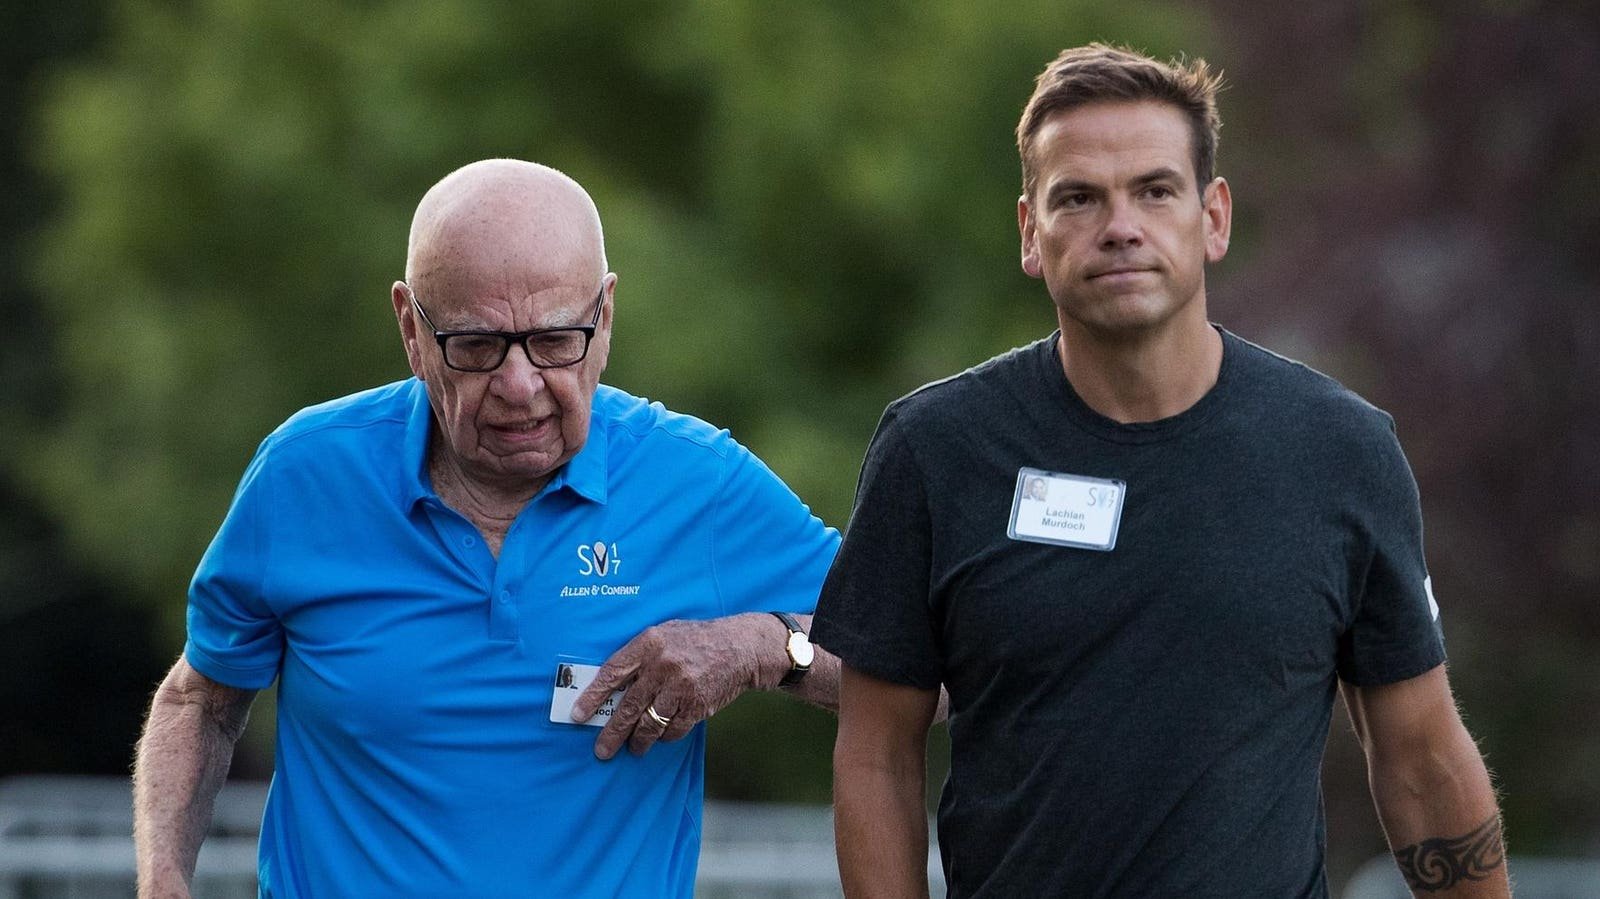 Lachlan Murdoch Wins His Family’s ‘Succession’: Here’s How He Took Over The Fox/News Corp Juggernaut